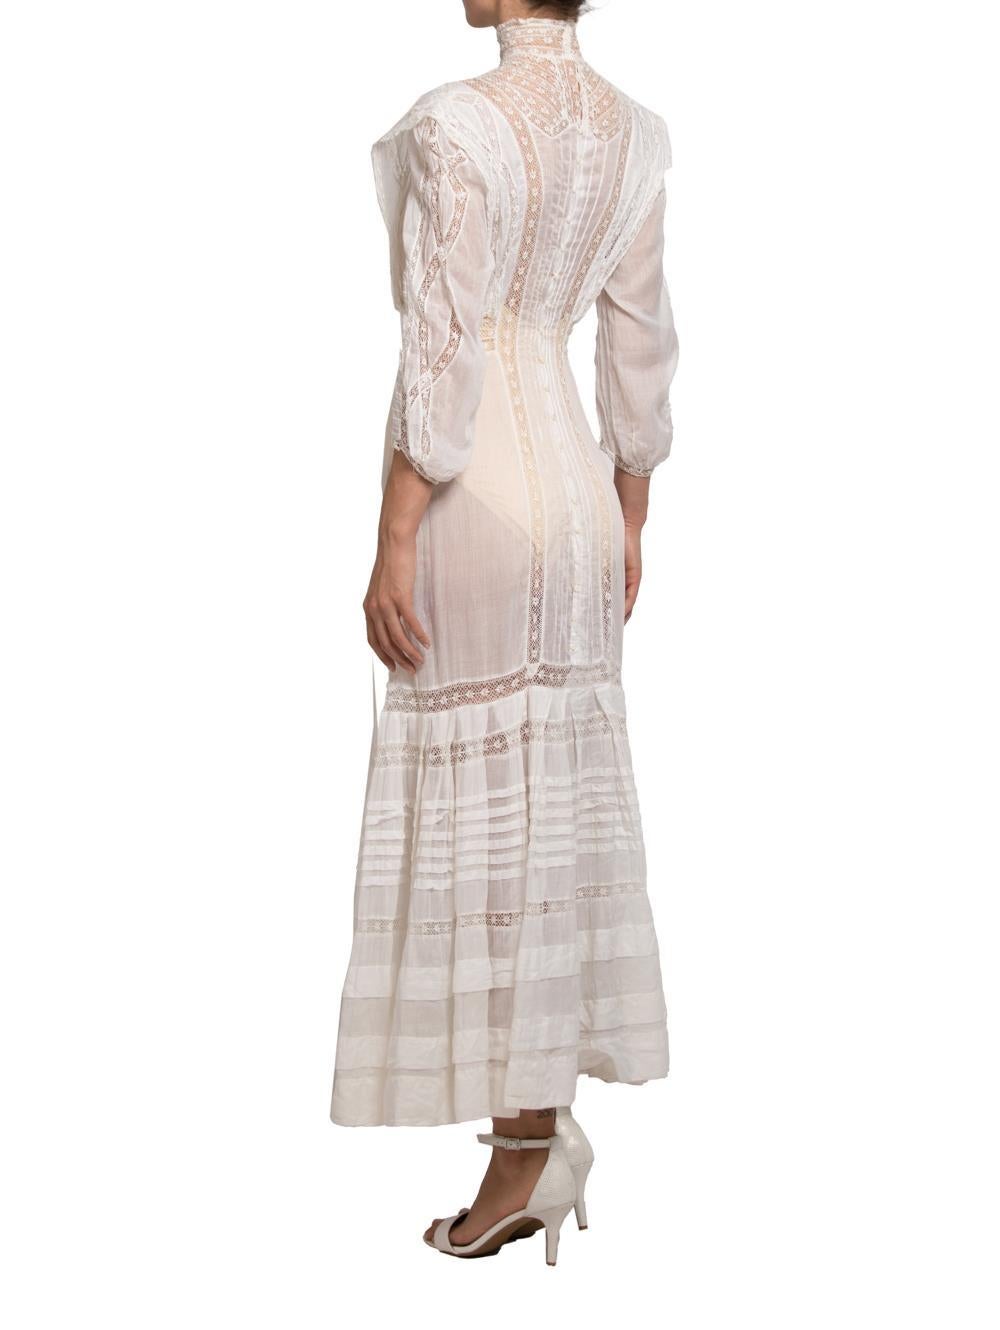 Victorian Cream Organic Cotton Voile & Lace Long Sleeved Dress For Sale 2